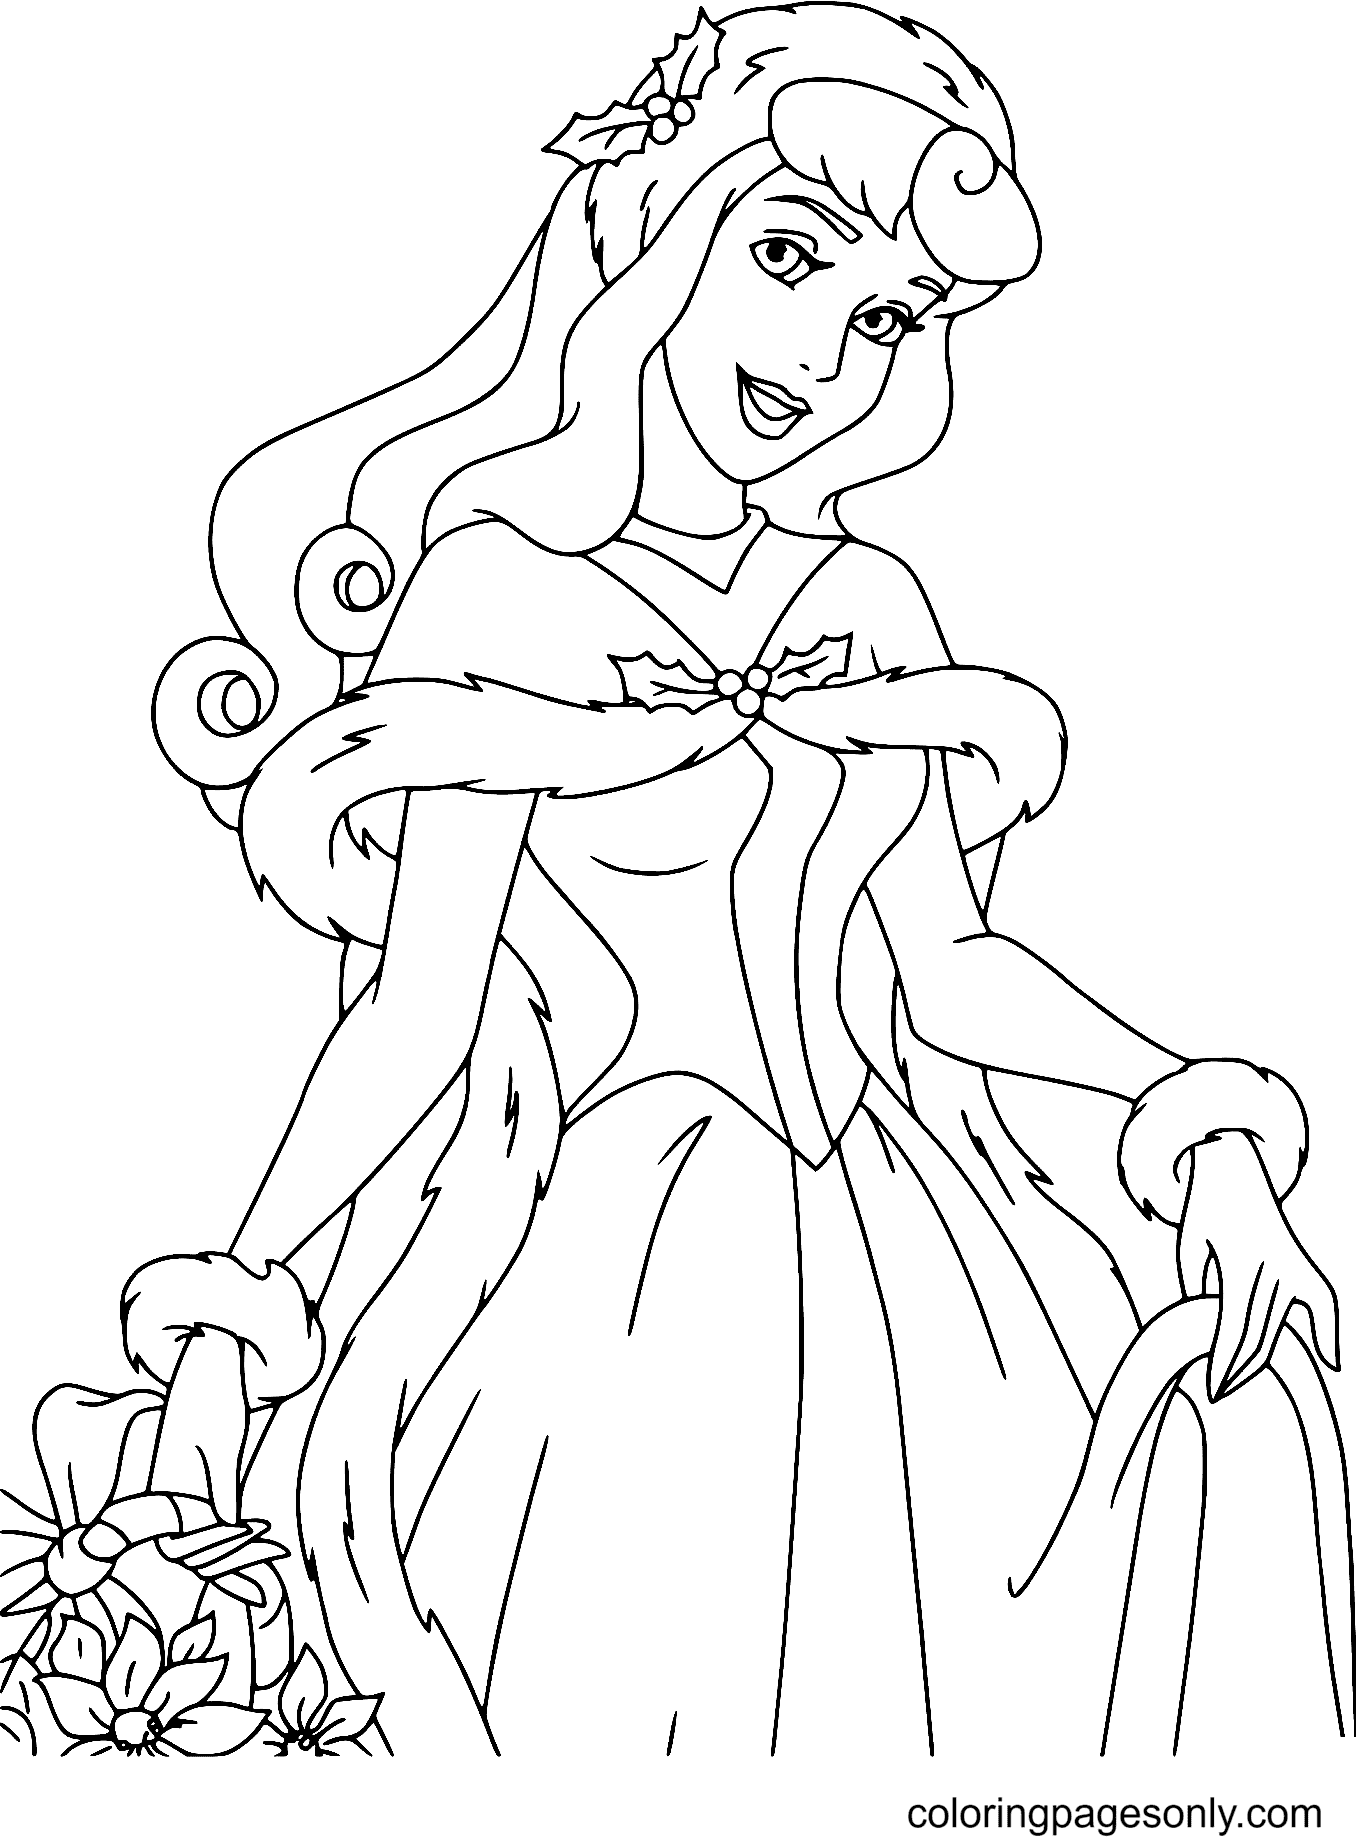 Aurora ready for Christmas Coloring Page